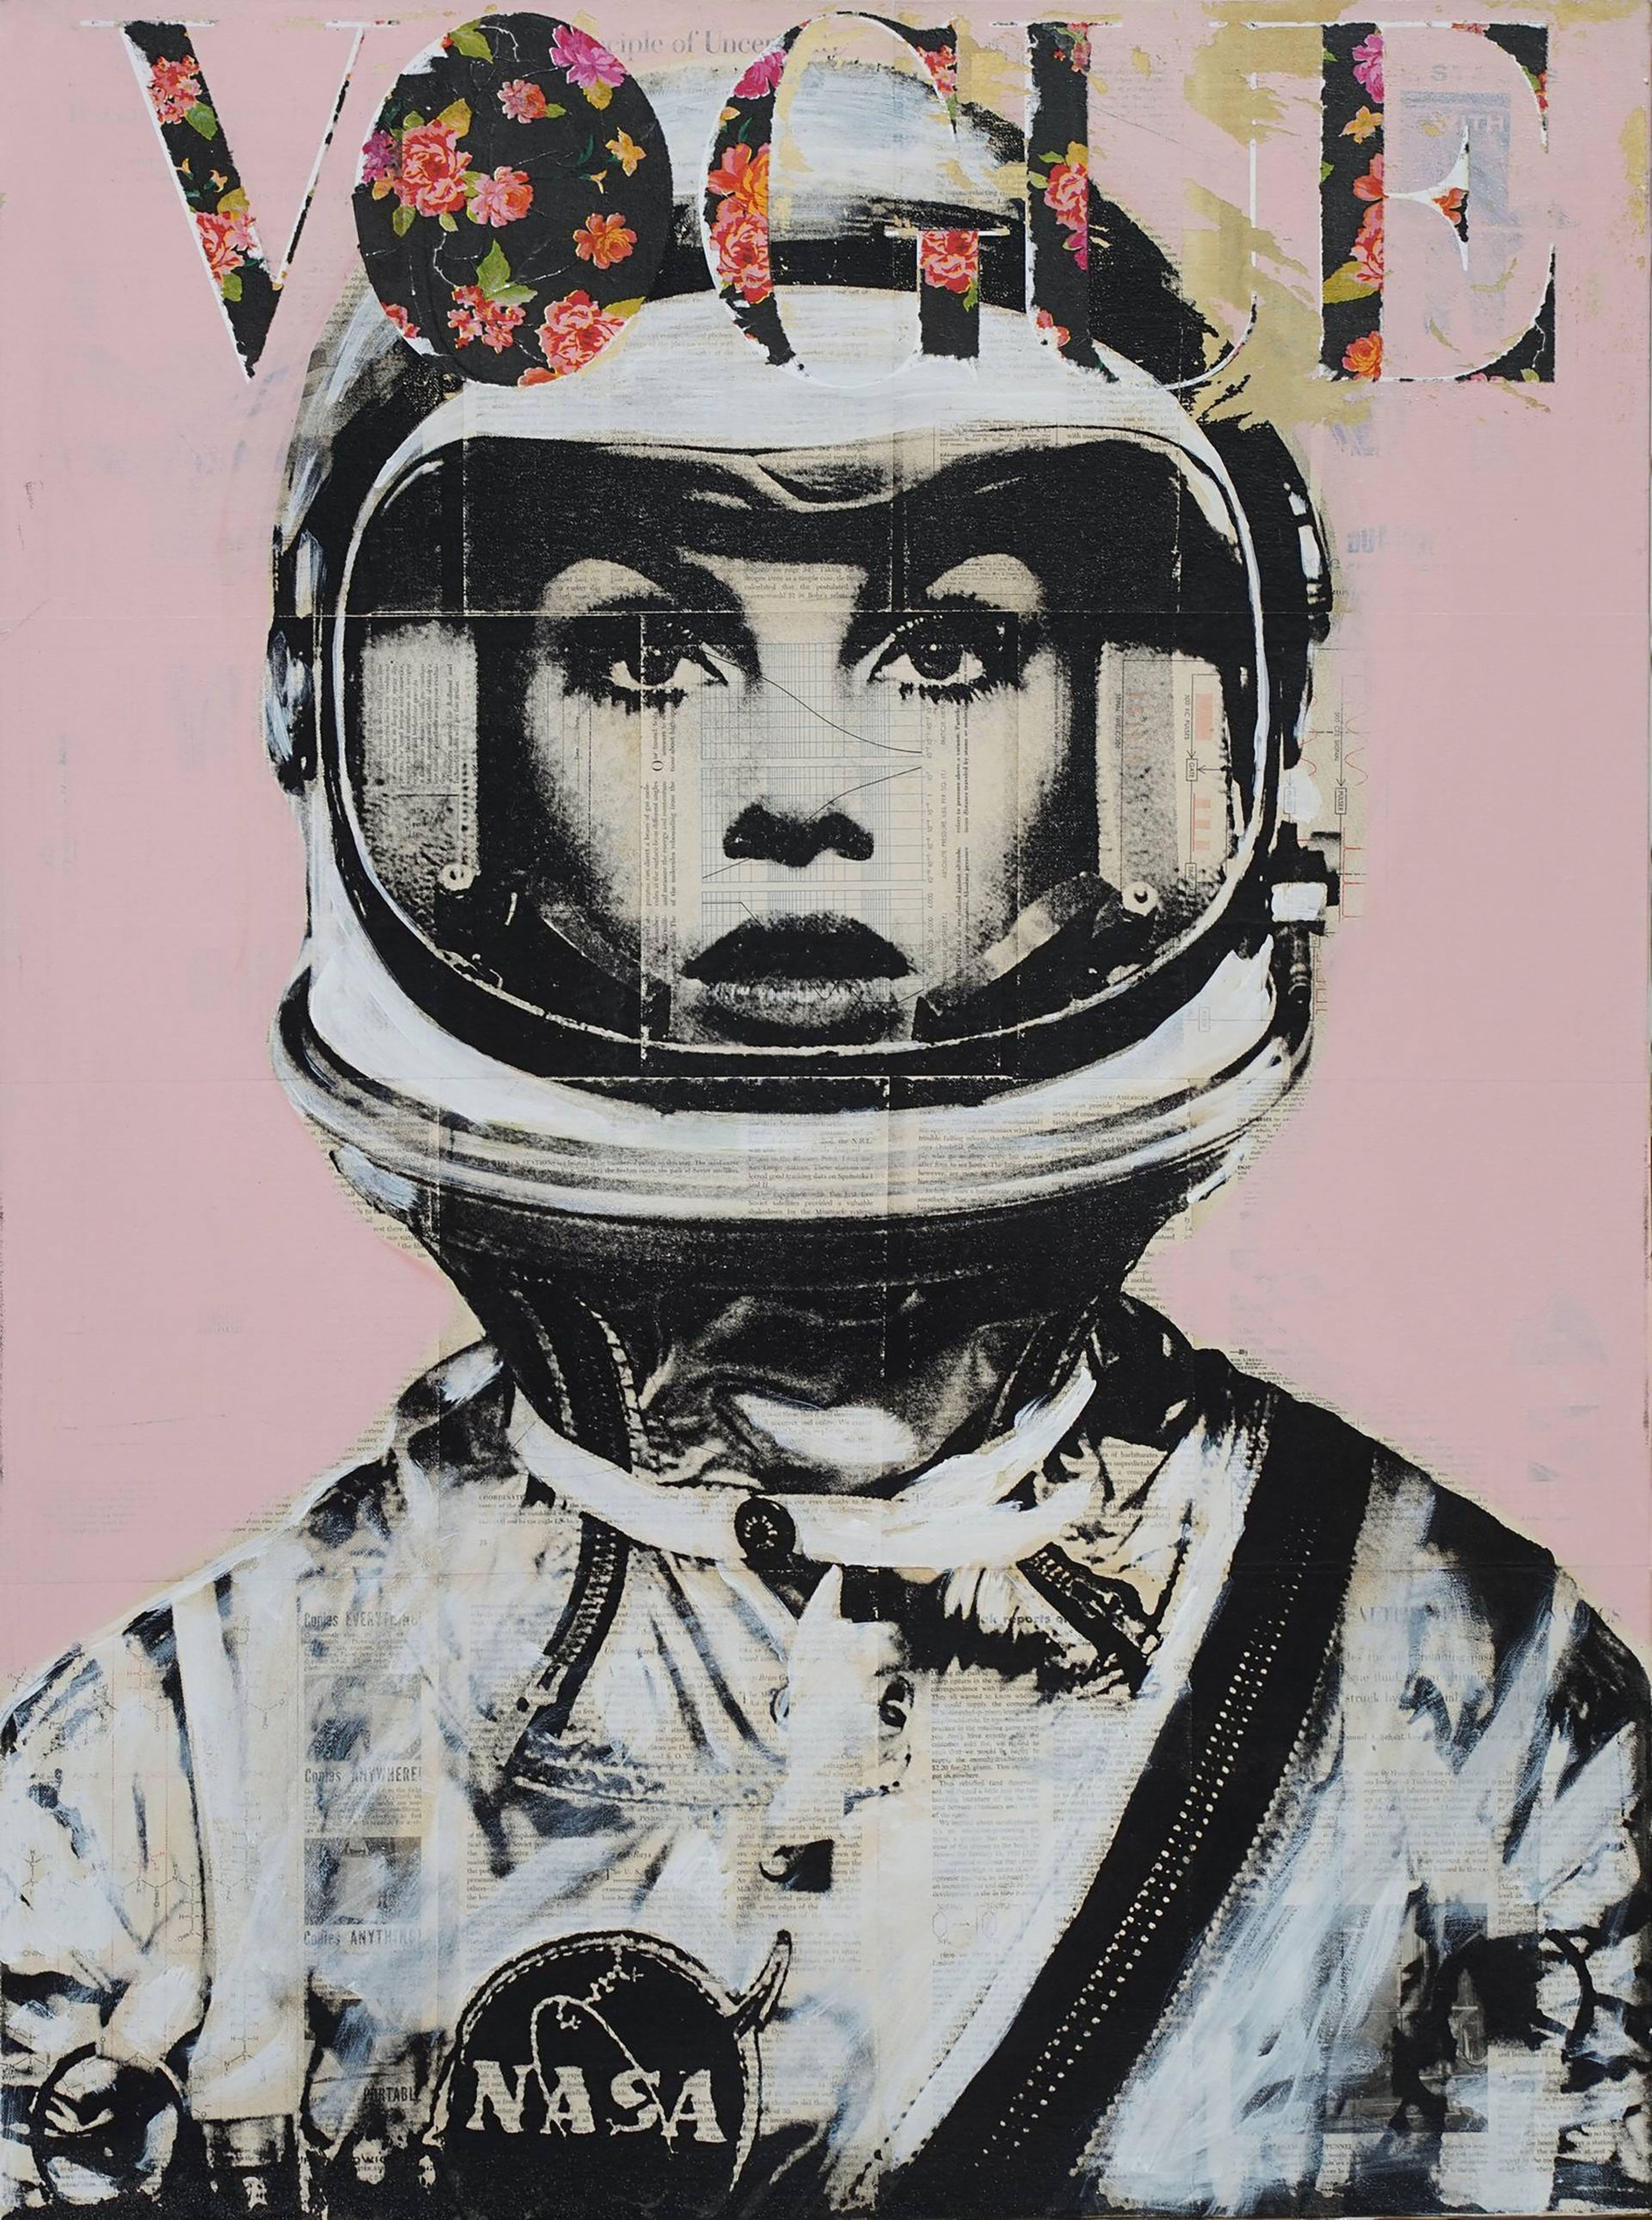 Space Frontier, Mixed Media on Canvas - Mixed Media Art by Dane Shue